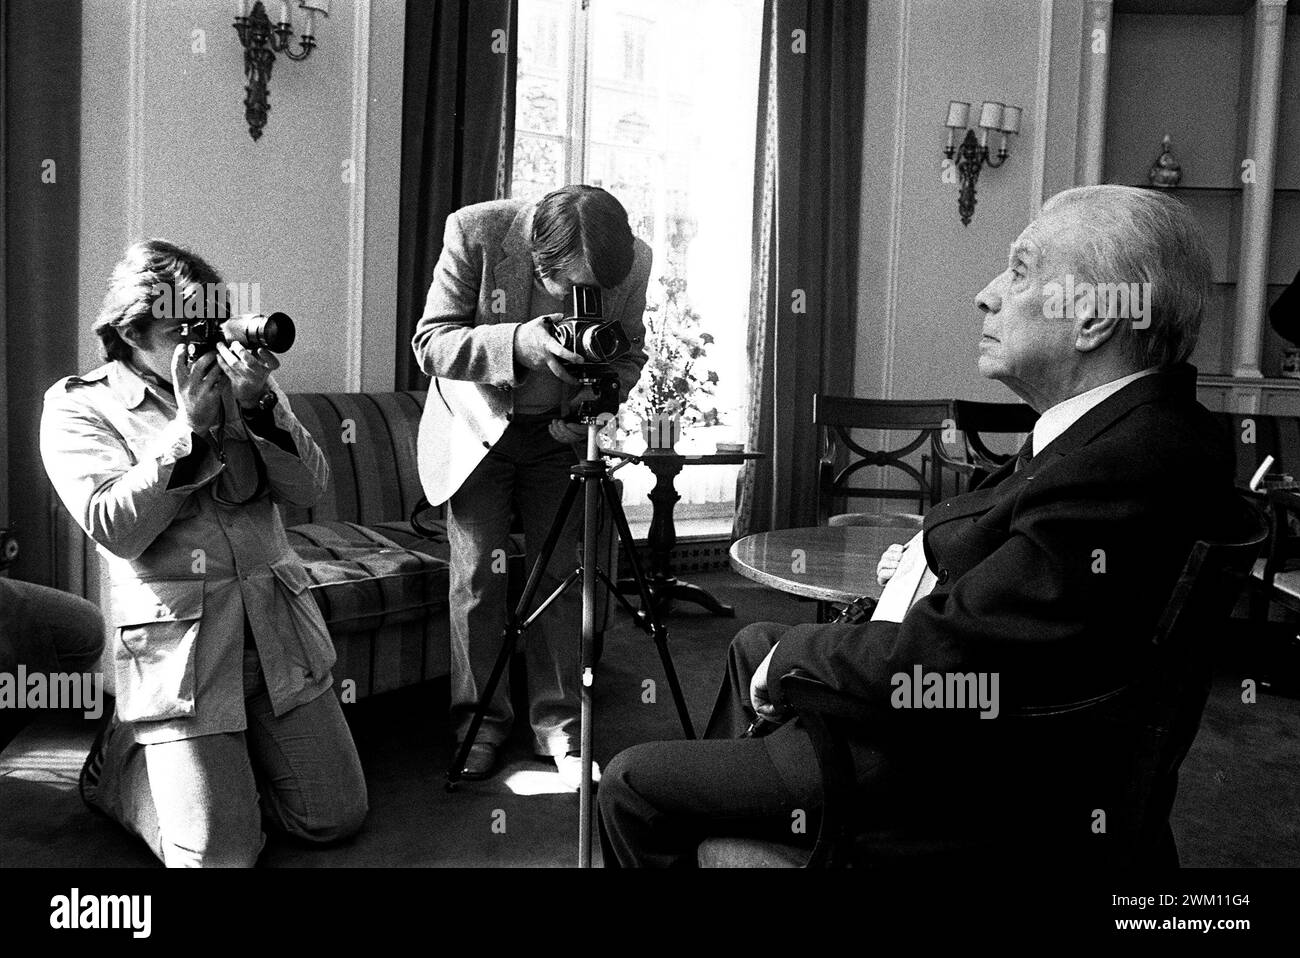 3825294 Jorge Luis Borges; (add.info.: Rome, Westin Excelsior Hotel, 1981. Argentinian writer Jorge Luis Borges posing for the photographers / Roma, Hotel Westin Excelsior, 1981. Lo scrittore argentino Jorge Luis Borges mentre posa per i fotografi); © Marcello Mencarini. All rights reserved 2024. Stock Photo